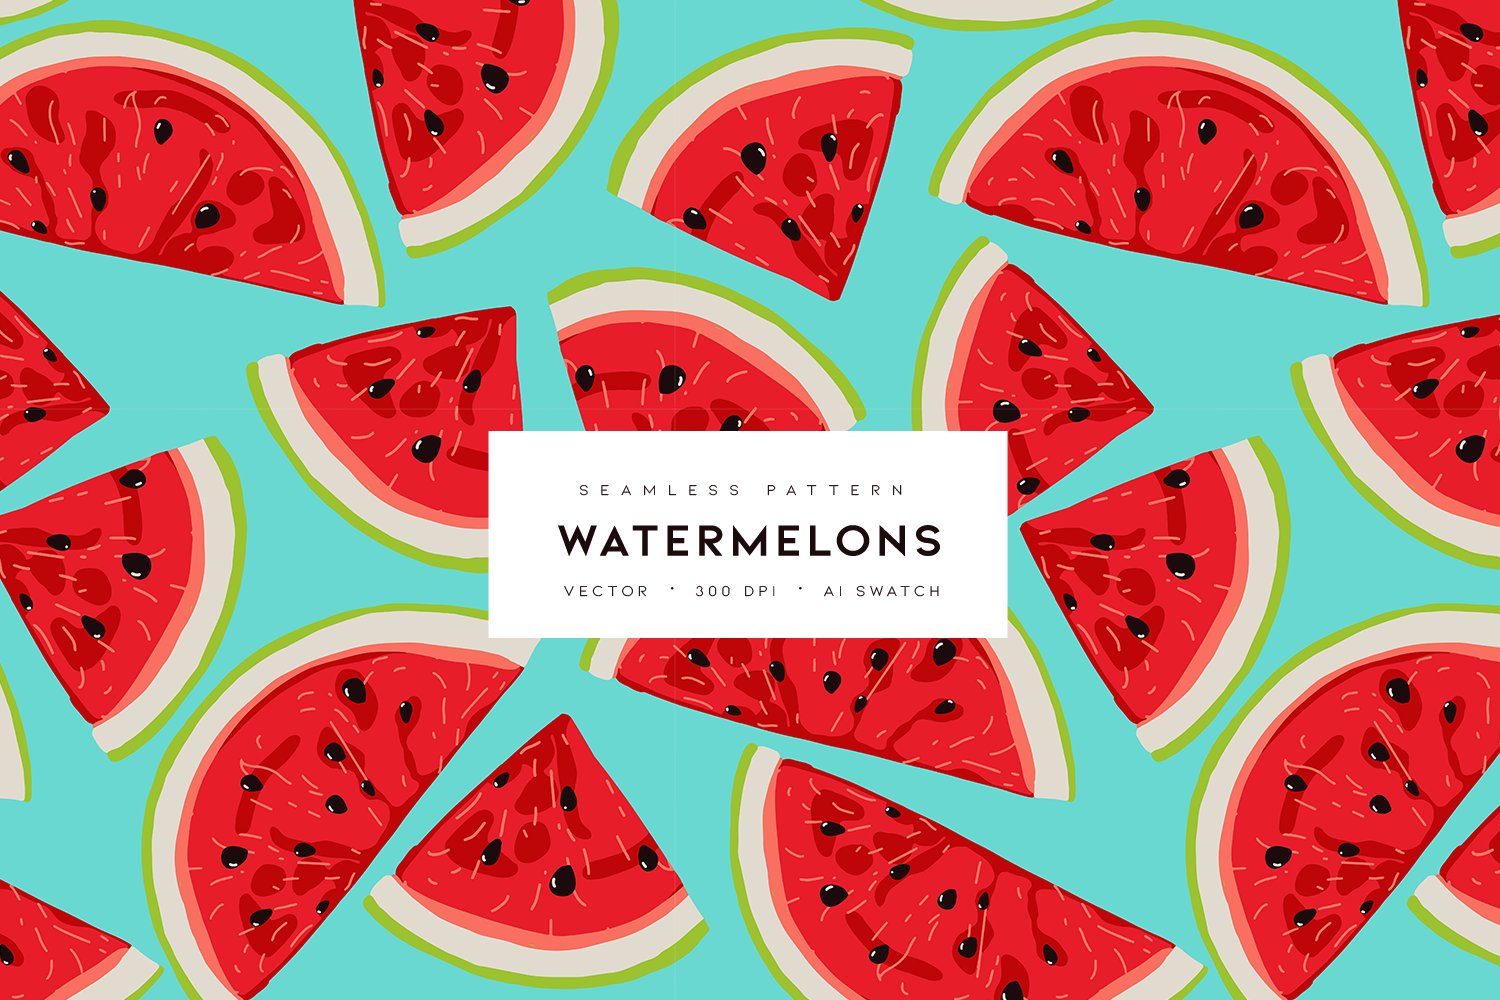 Watermelons cover image.